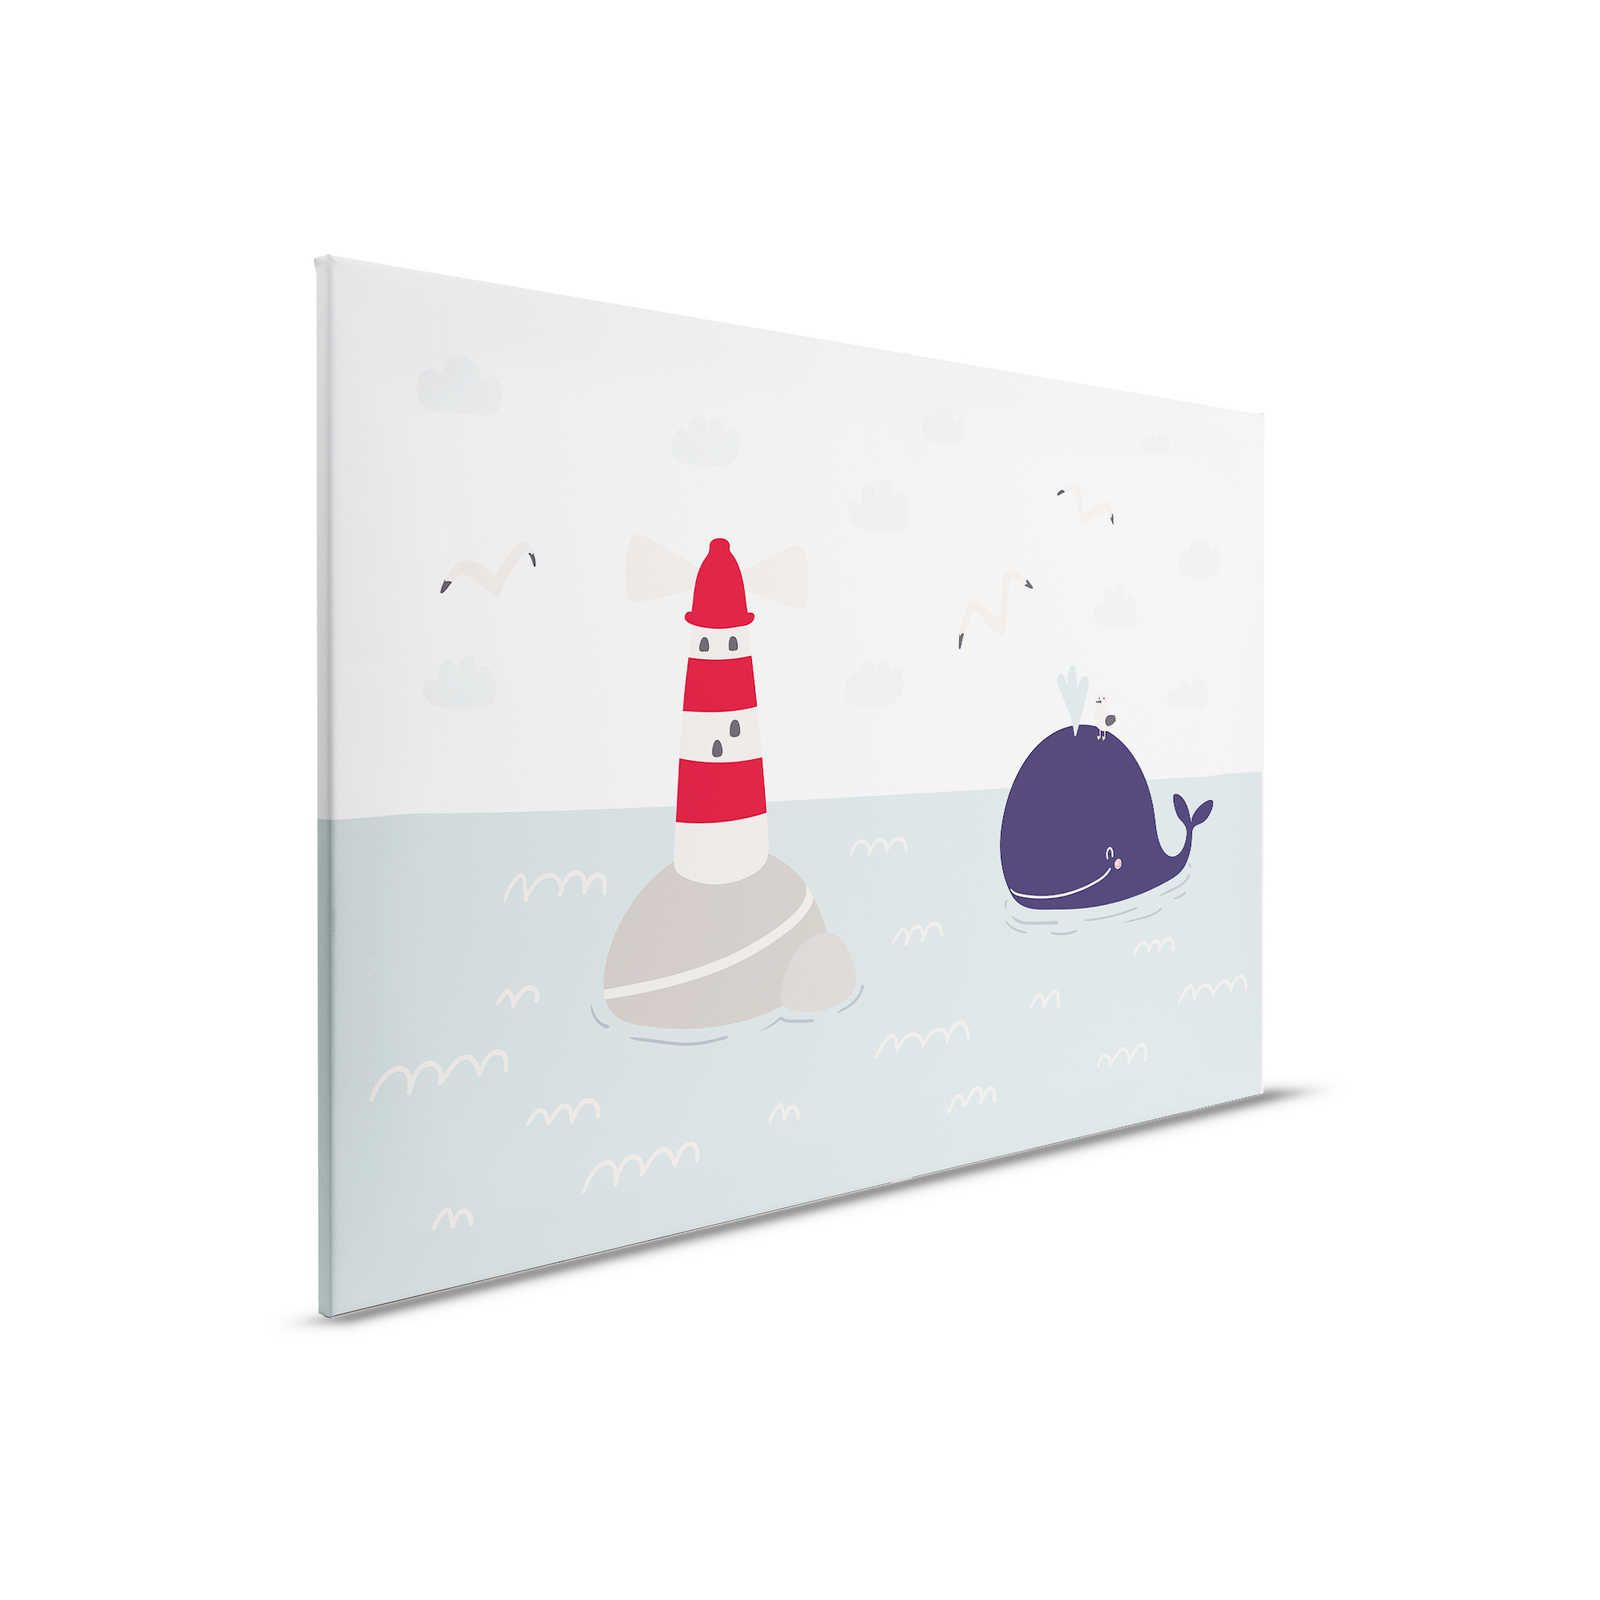         Canvas for children's room with lighthouse and whale - 90 cm x 60 cm
    